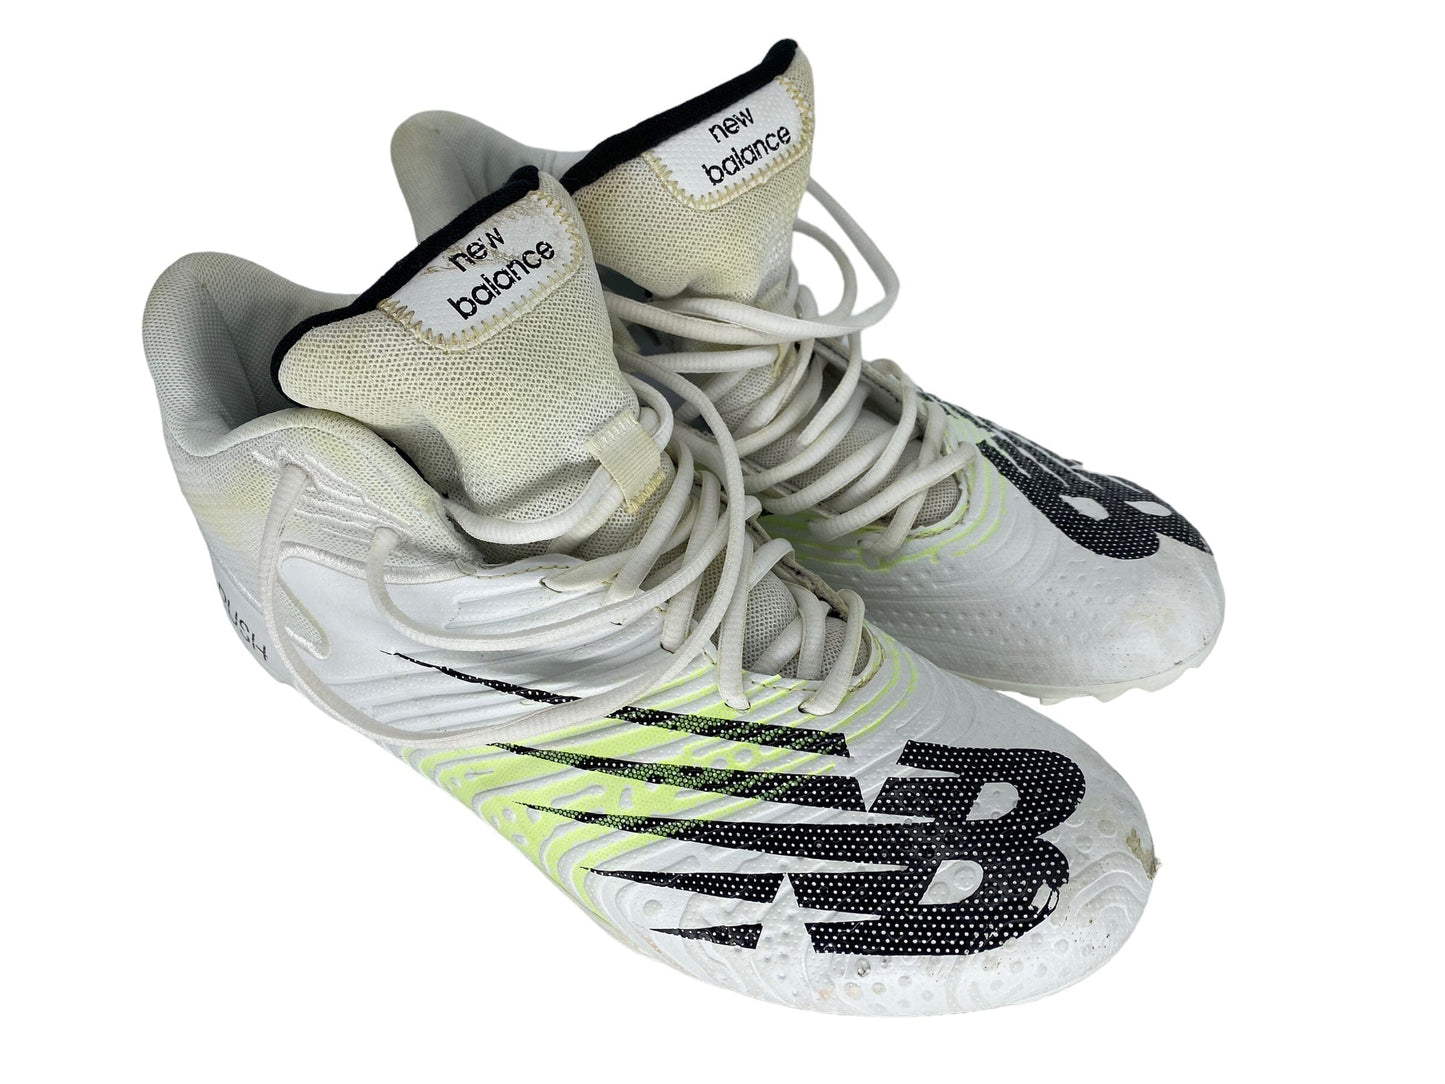 Used New Balance Cleats - White - size 10 Paintball Gun from CPXBrosPaintball Buy/Sell/Trade Paintball Markers, New Paintball Guns, Paintball Hoppers, Paintball Masks, and Hormesis Headbands